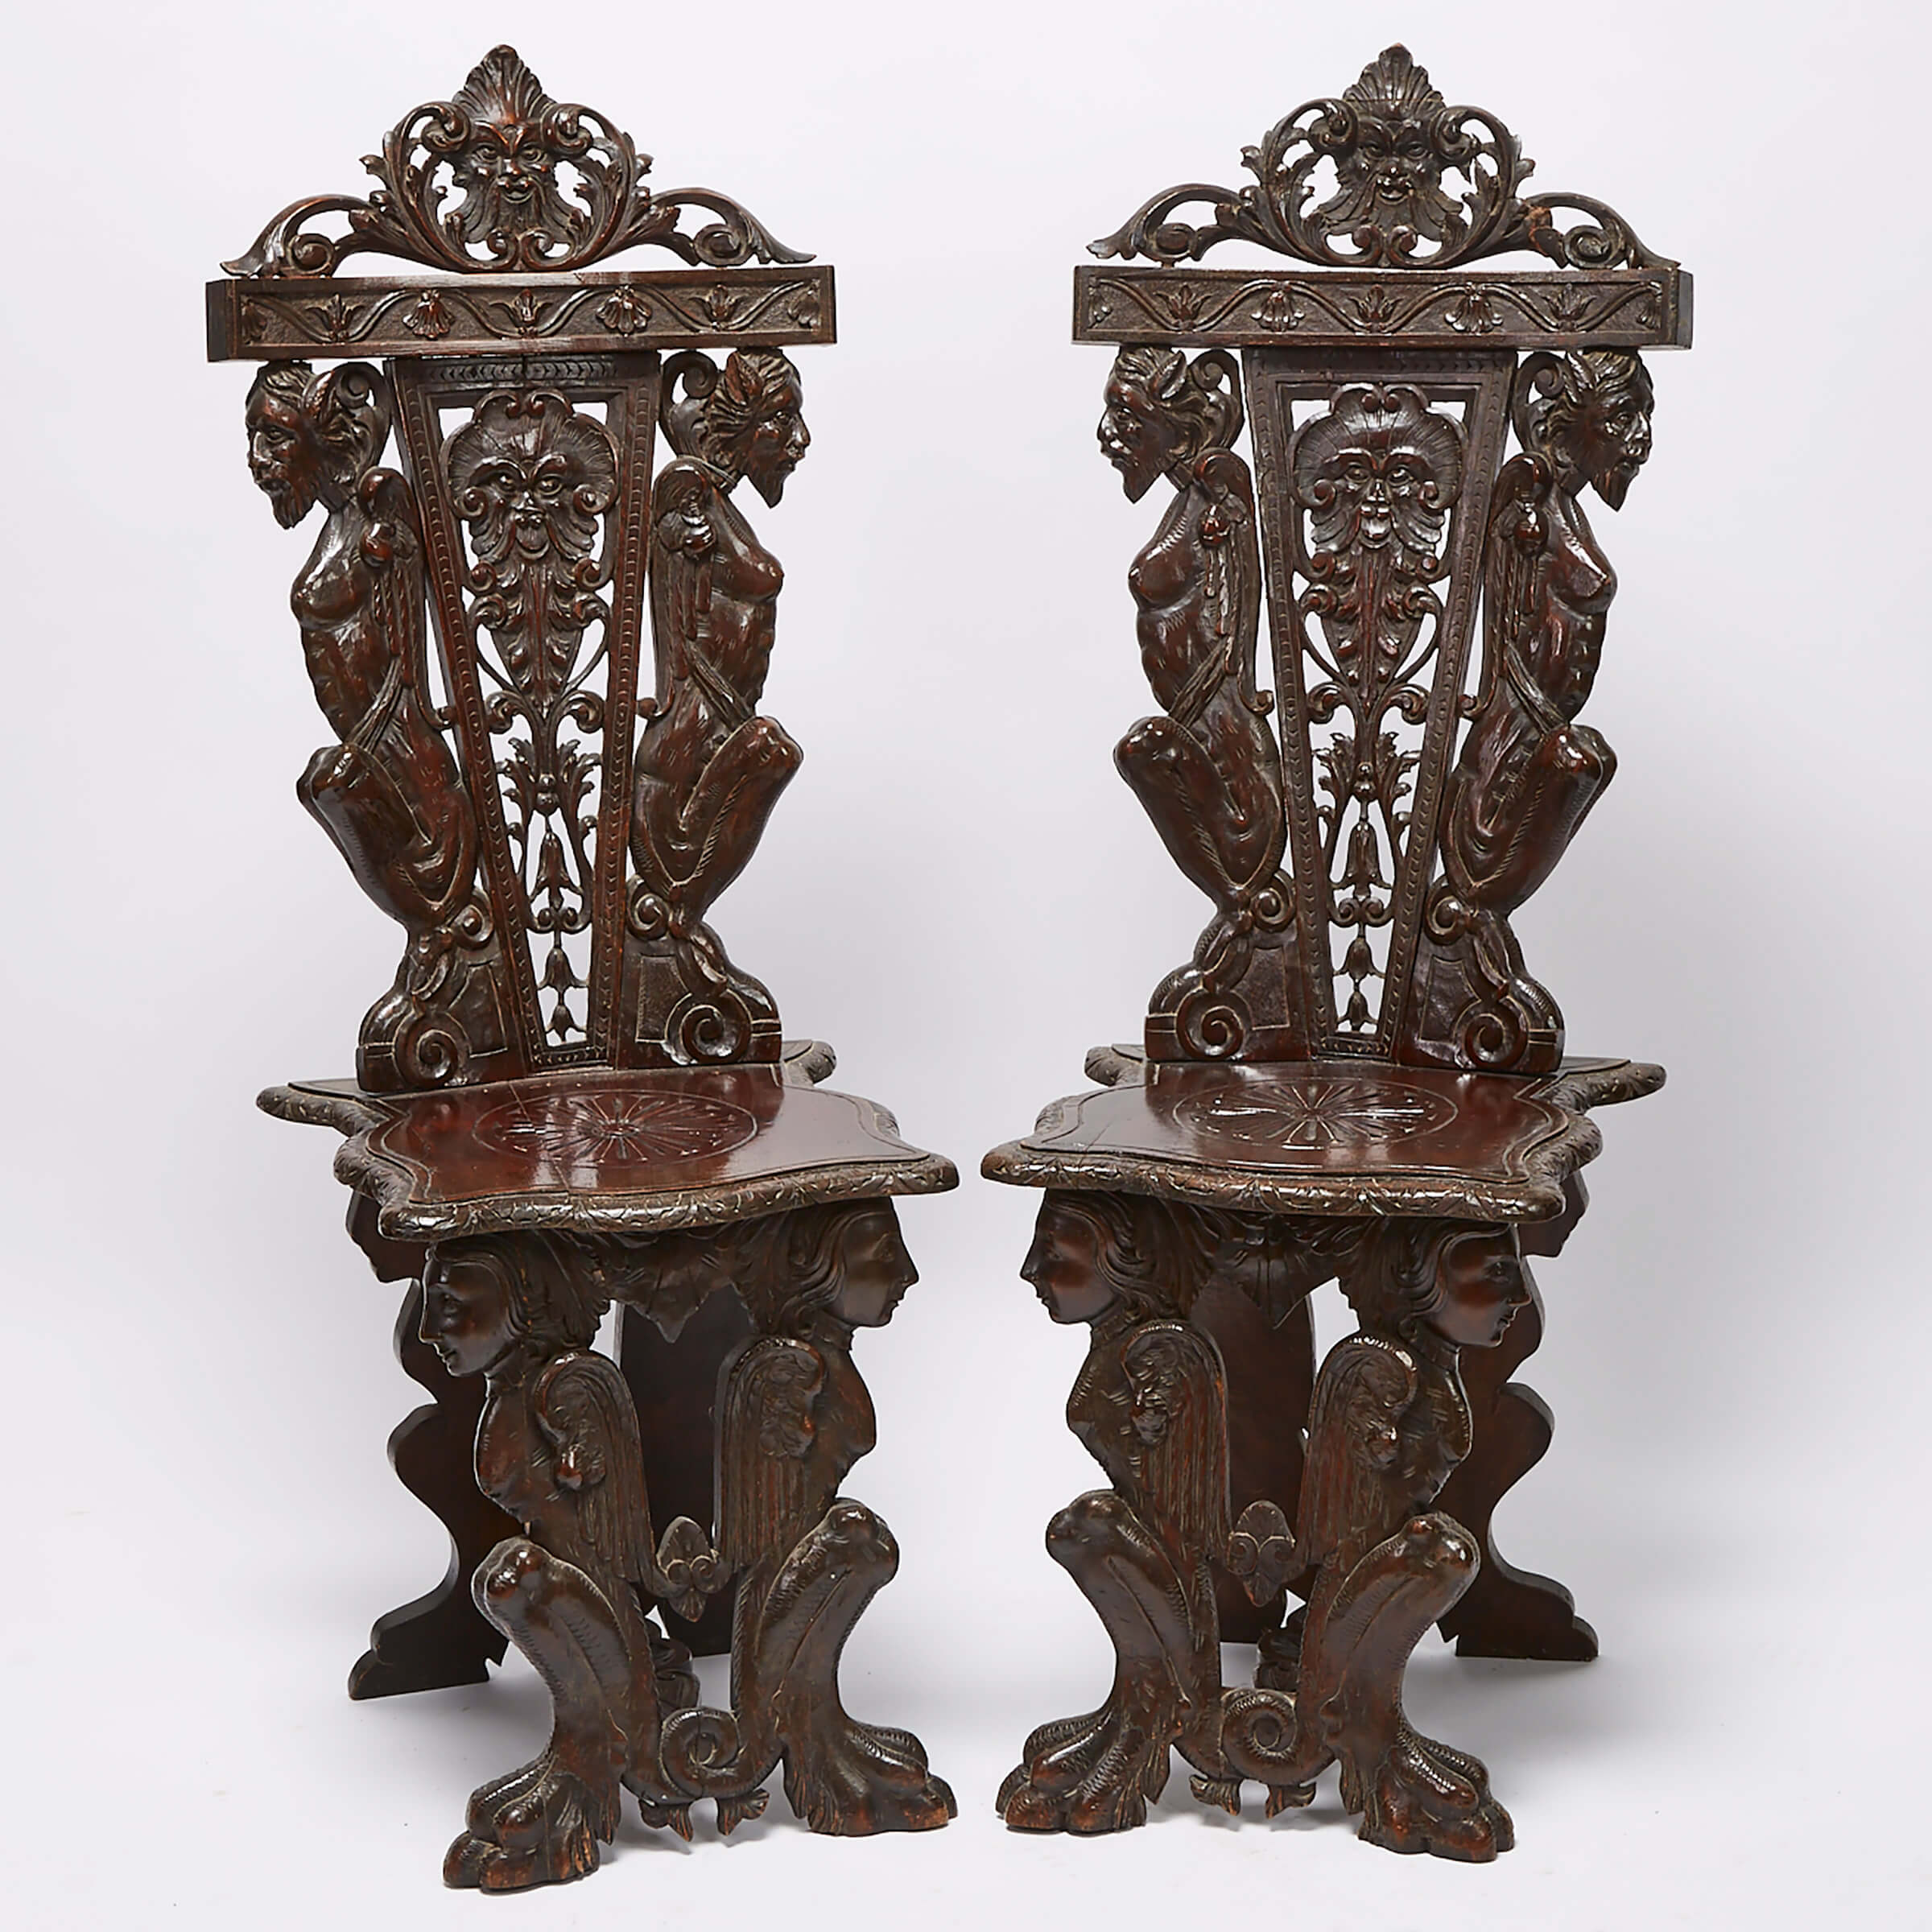 Pair of Victorian Renaissance Style Carved Walnut Hall Chairs, late 19th century